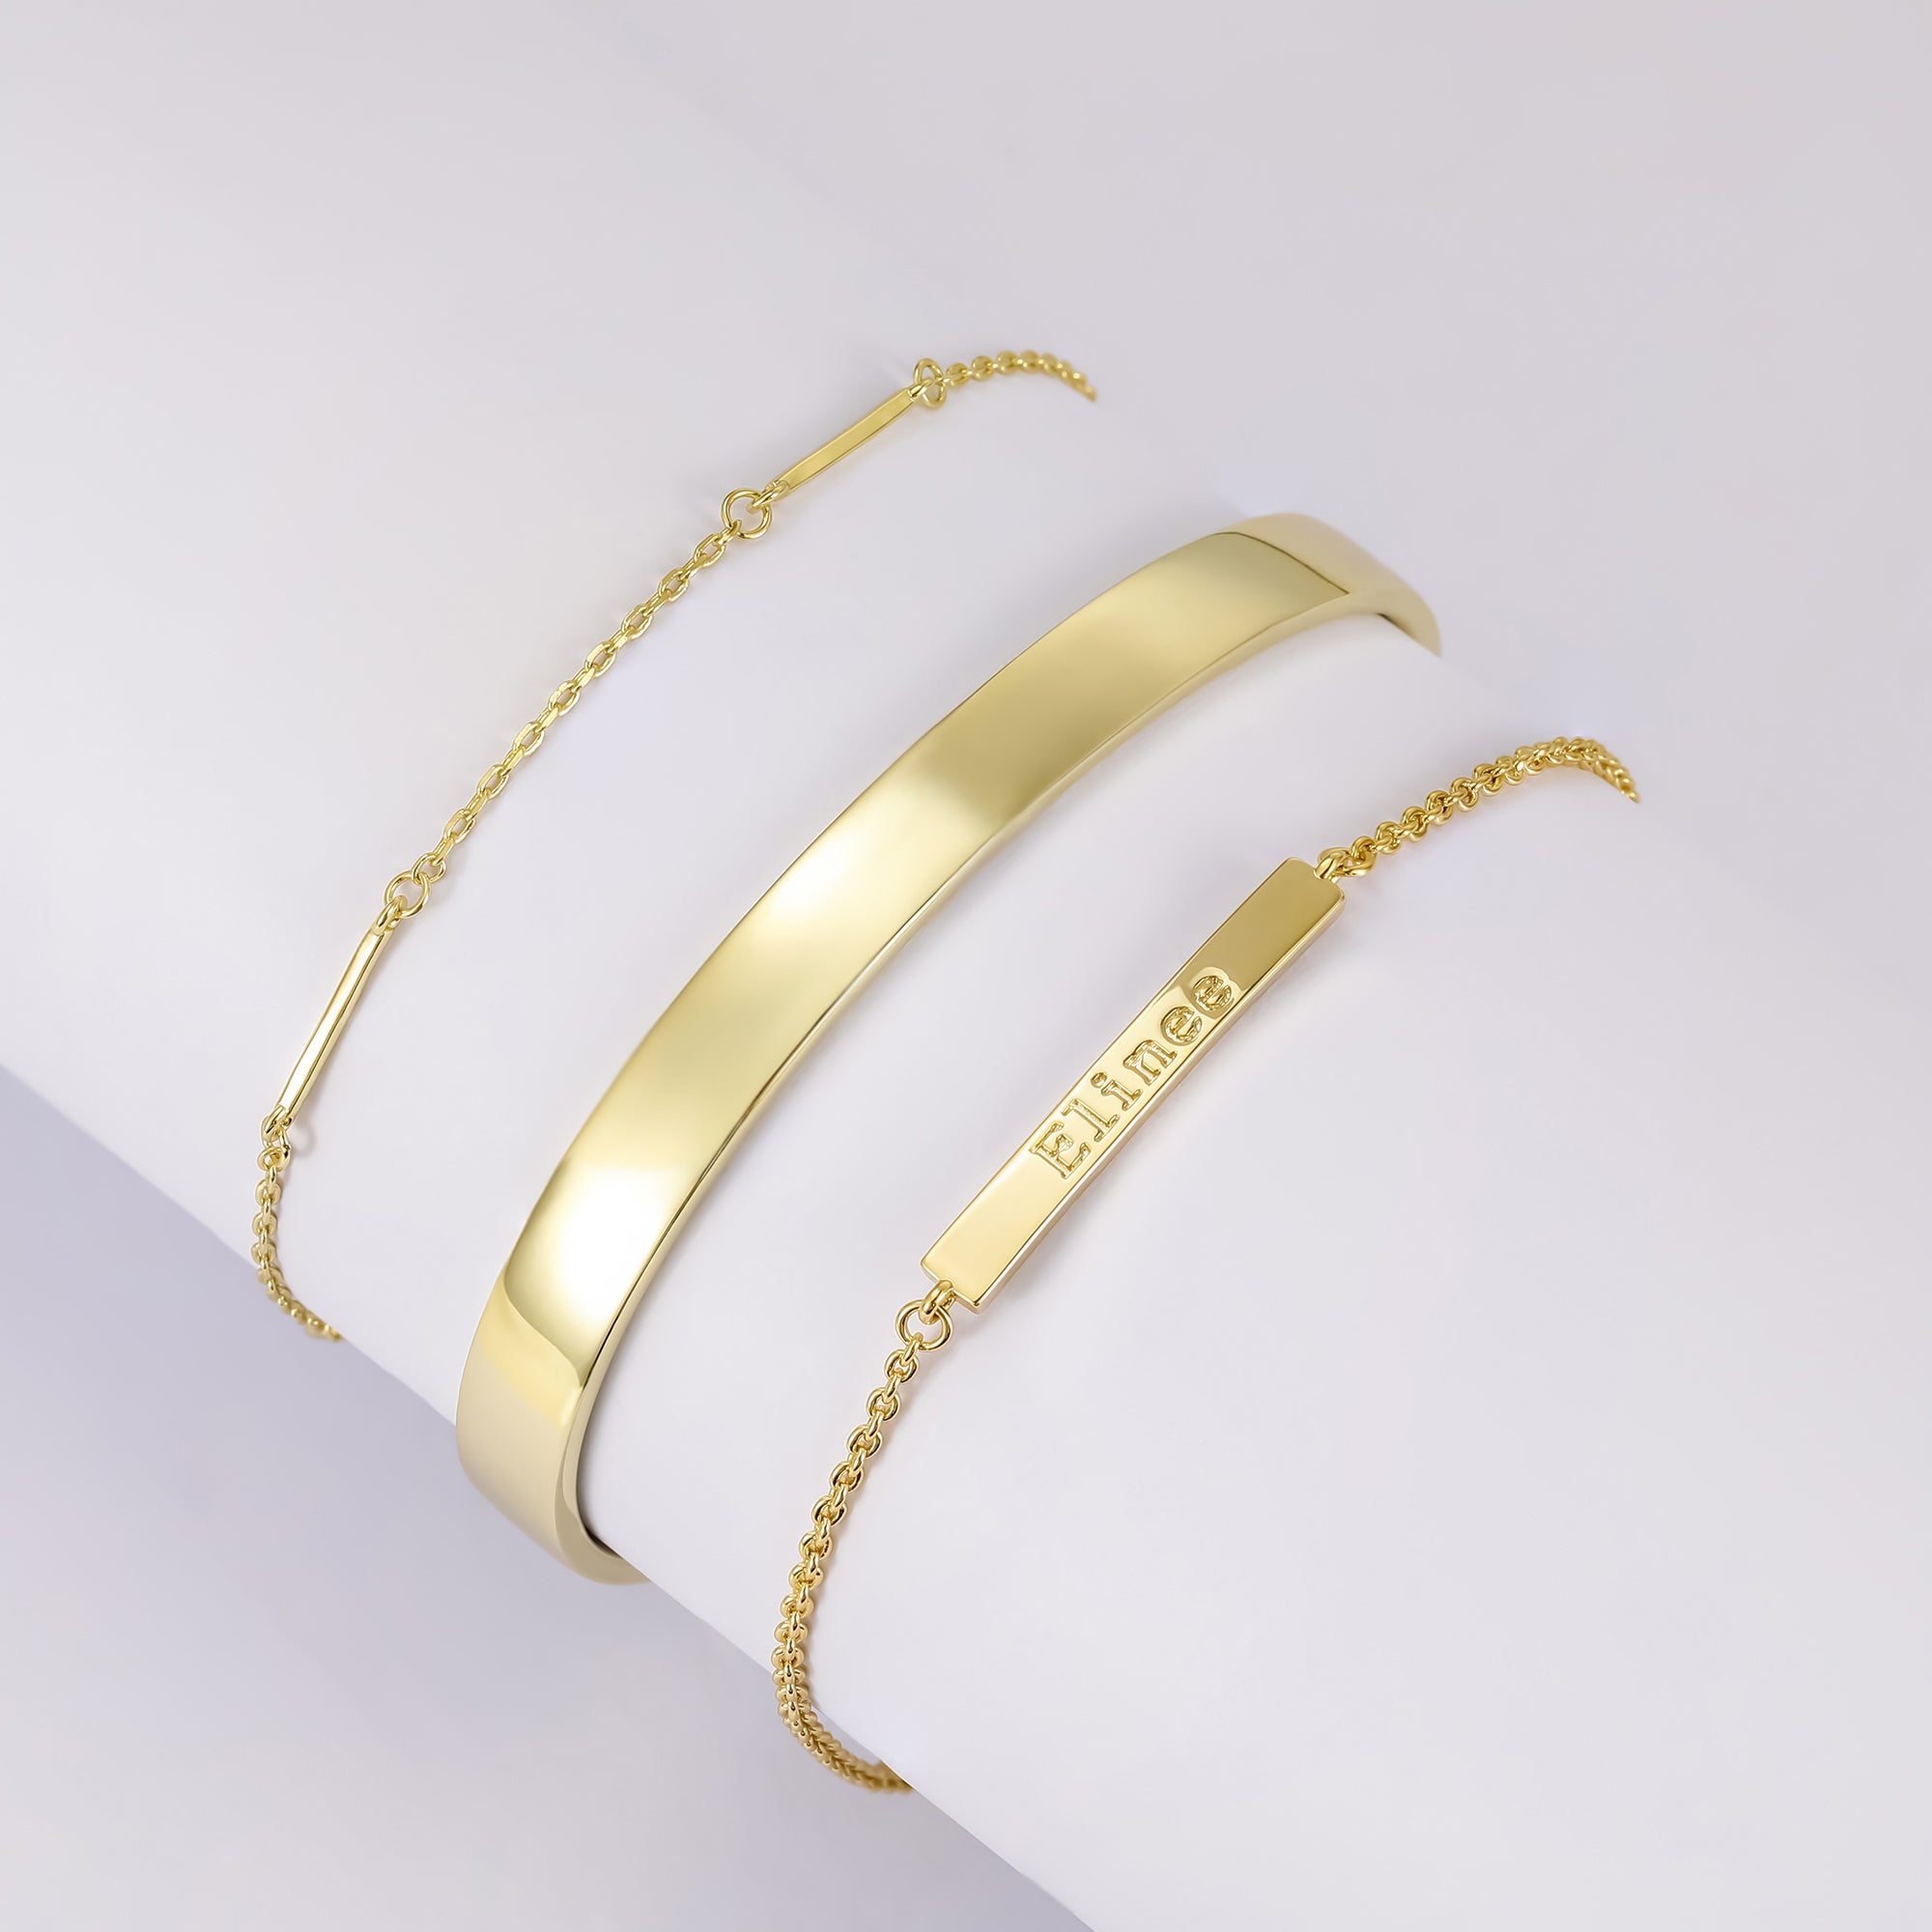 Discover Bangles & Bracelets: Brighten Up Your Look!